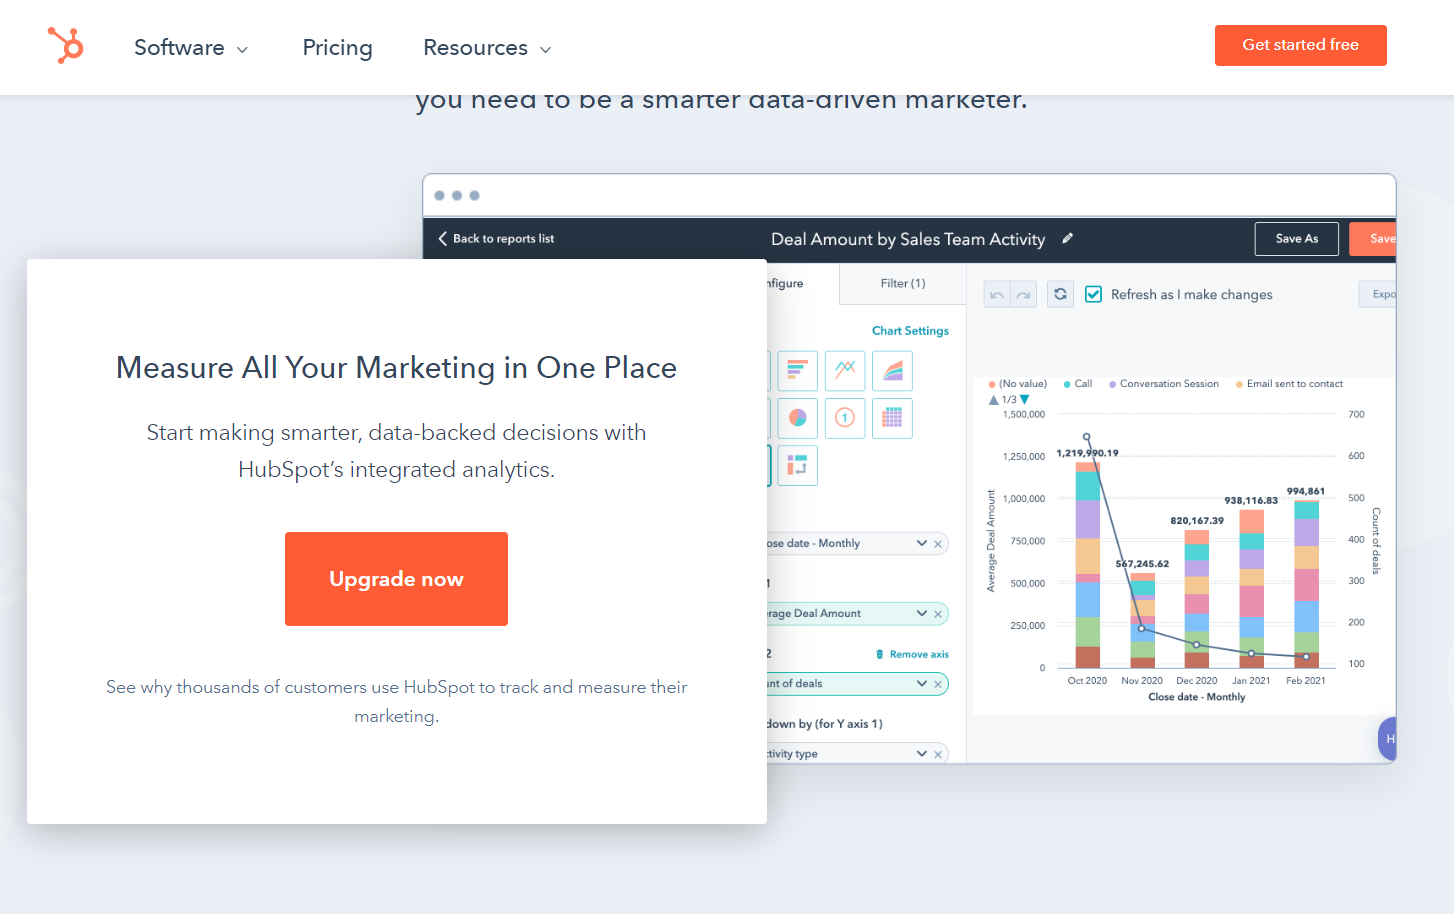 How HubSpot promotes their embedded analytics as a unique selling point